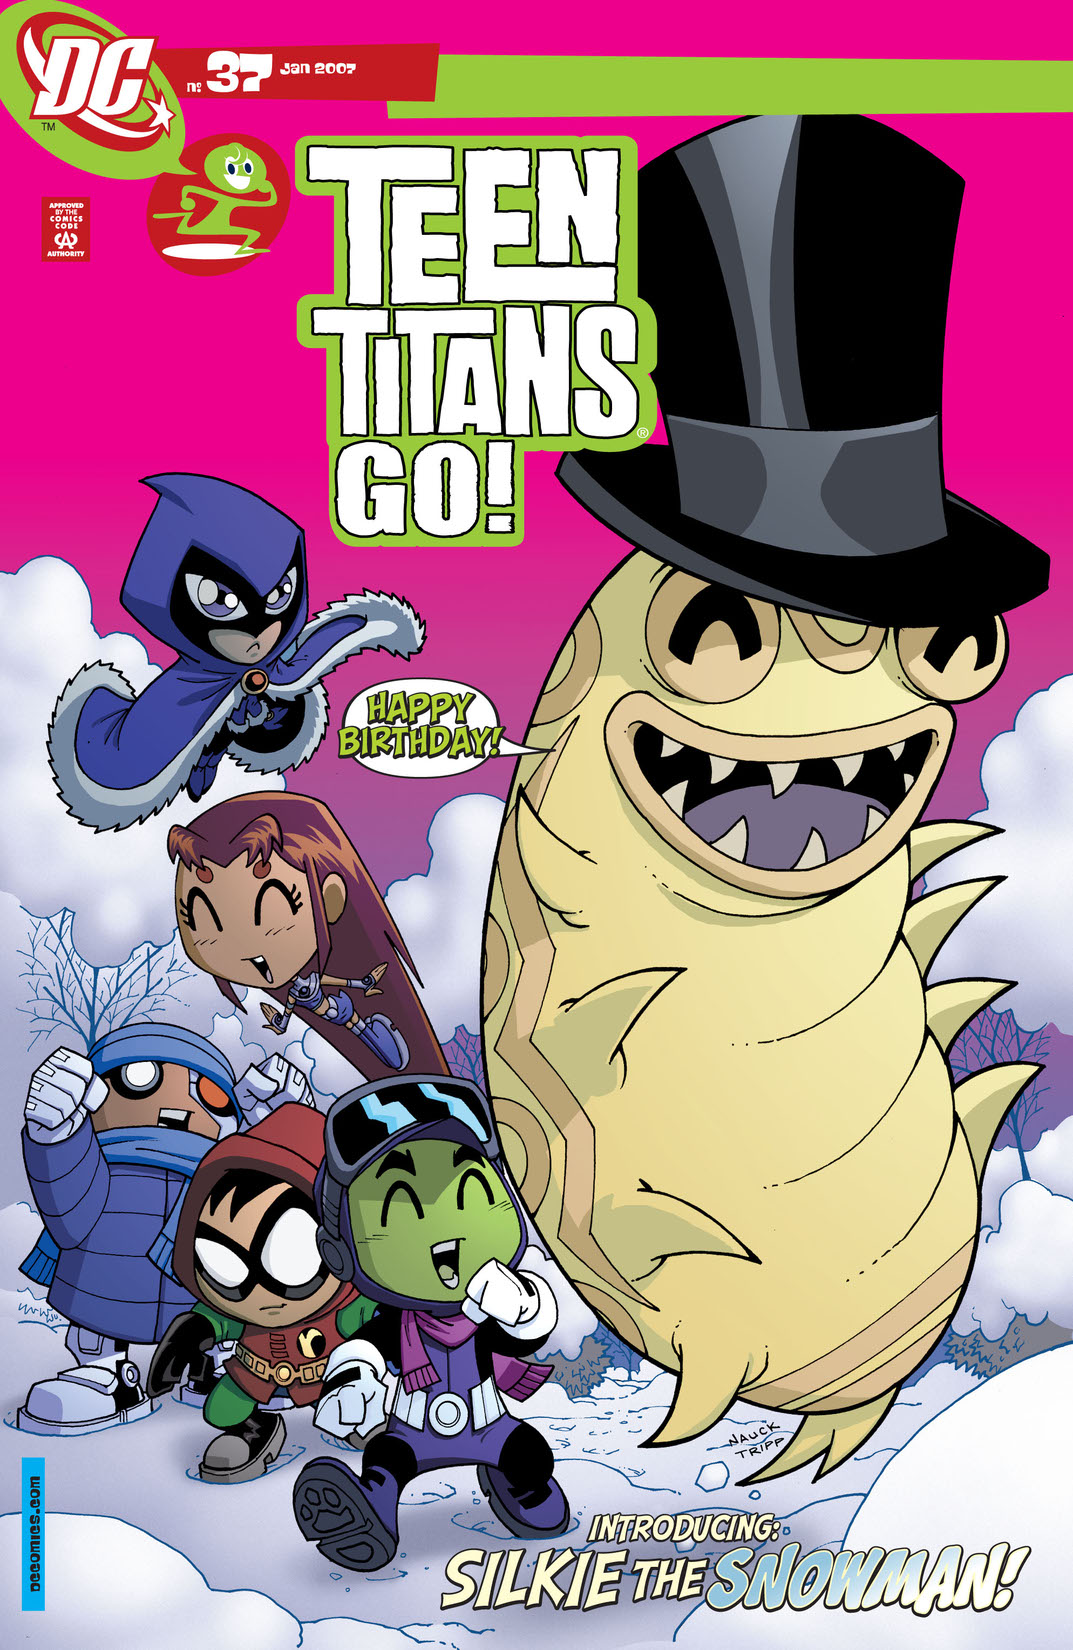 Teen Titans Go! (2003-) #37 preview images